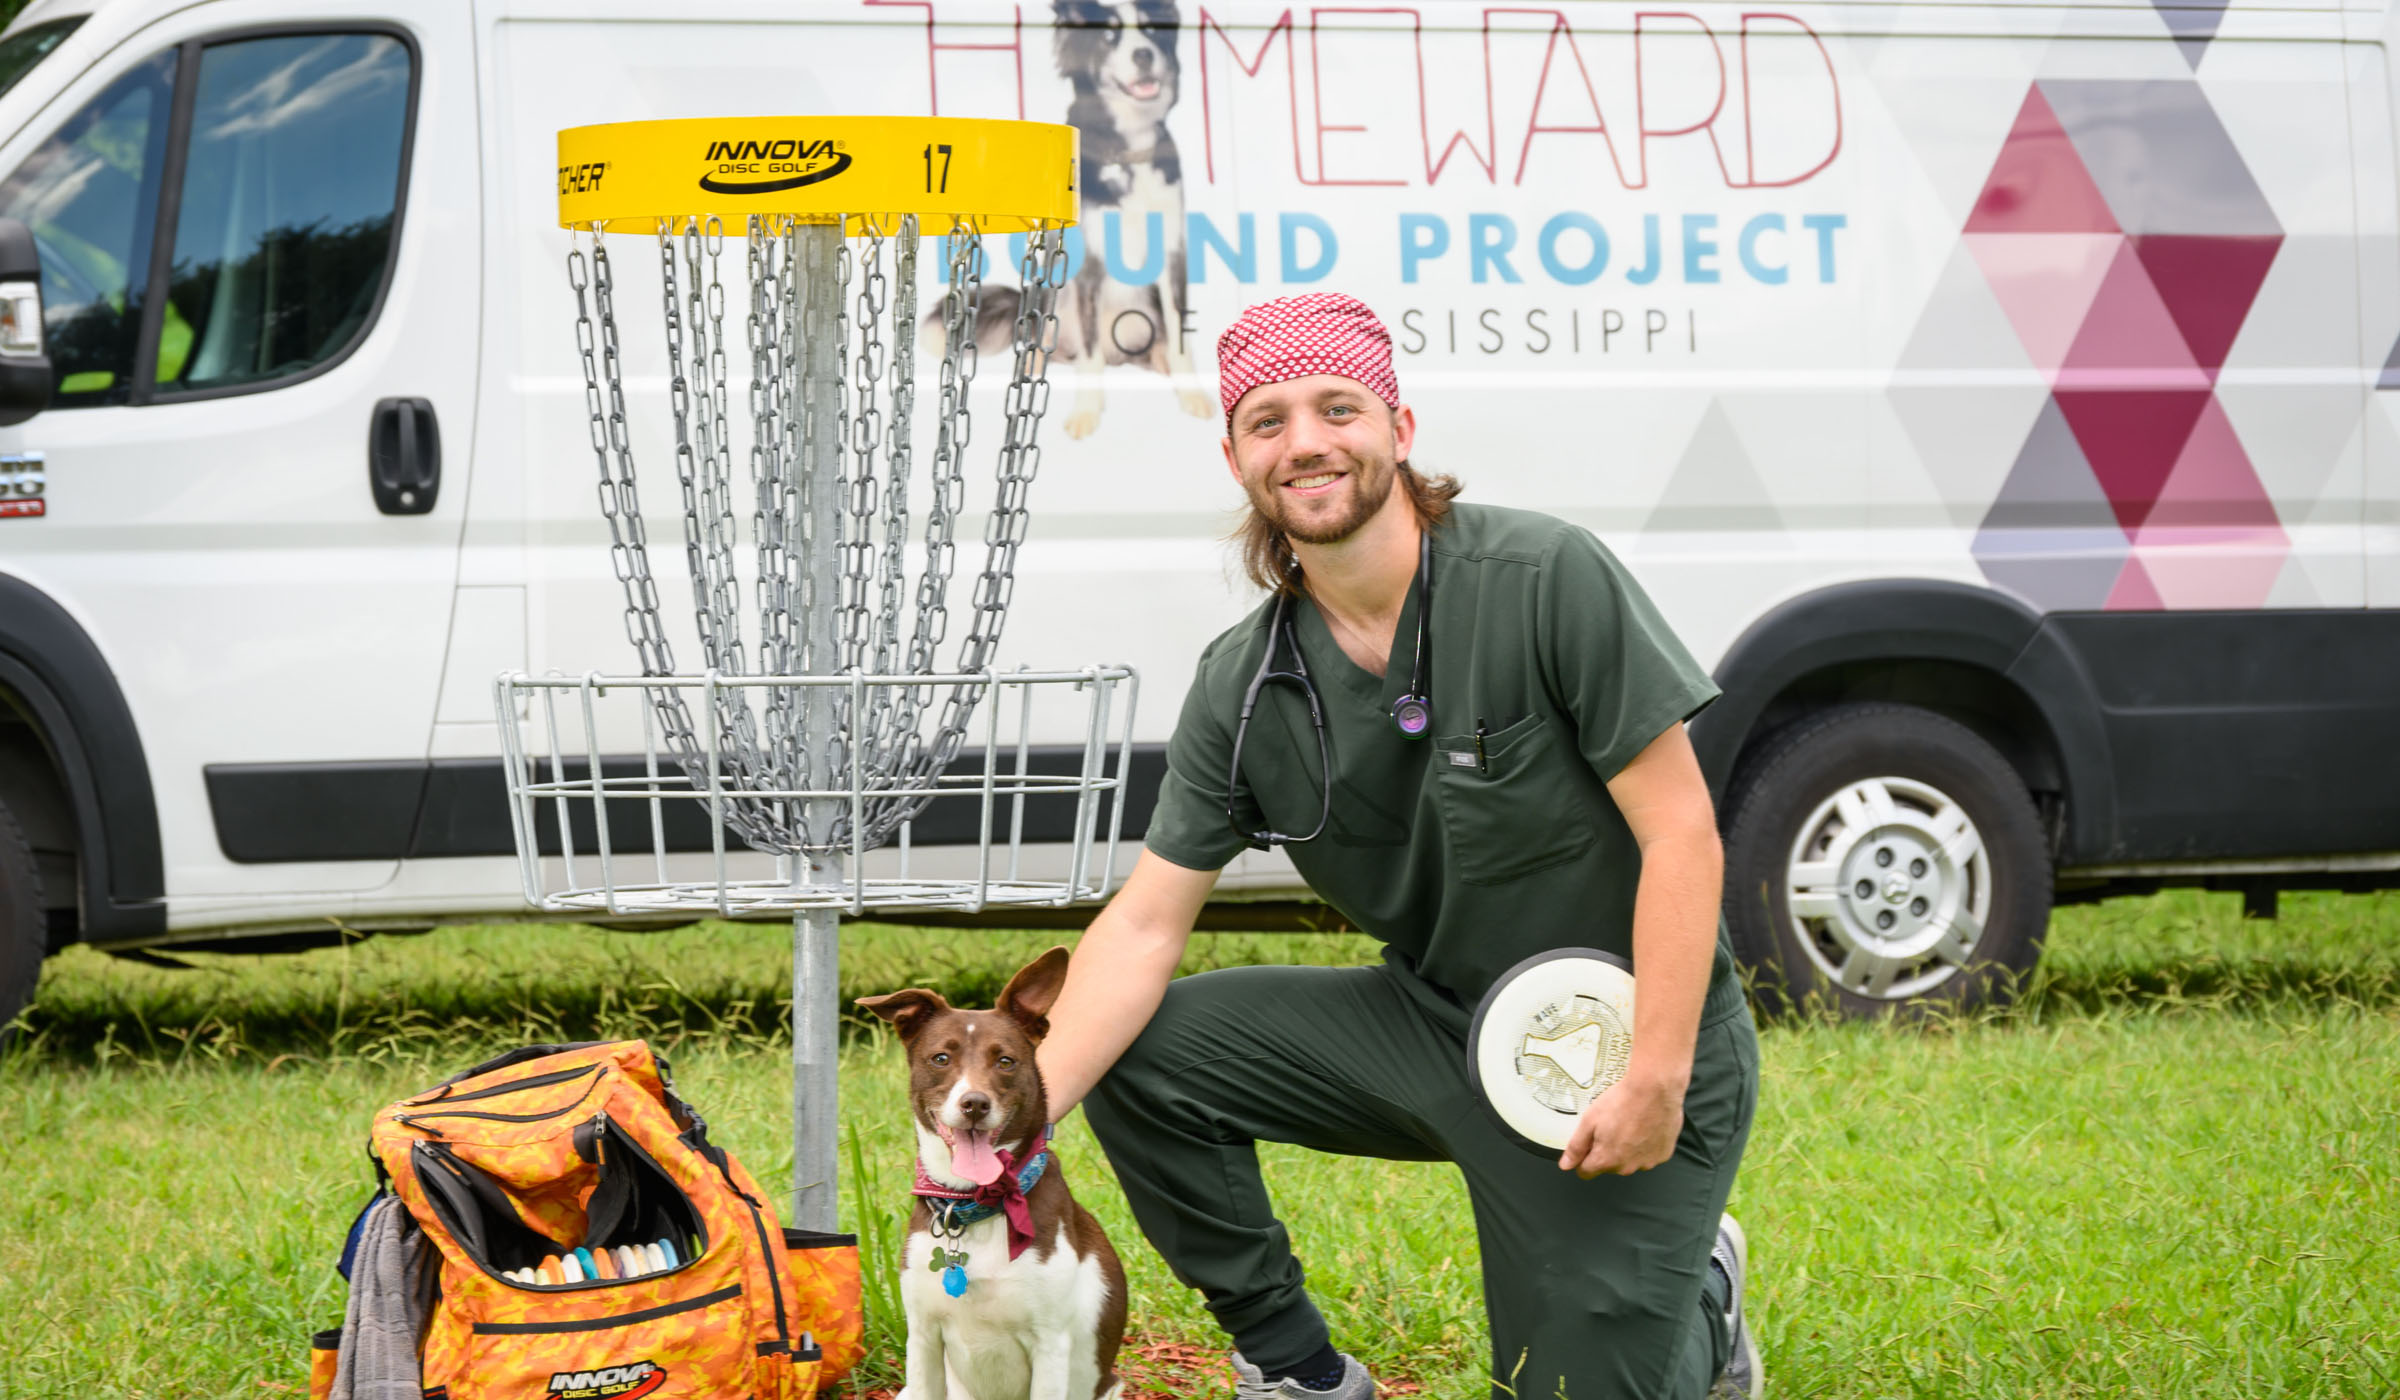 Ian Evans, pictured in front of a disc golf set, dog and van.